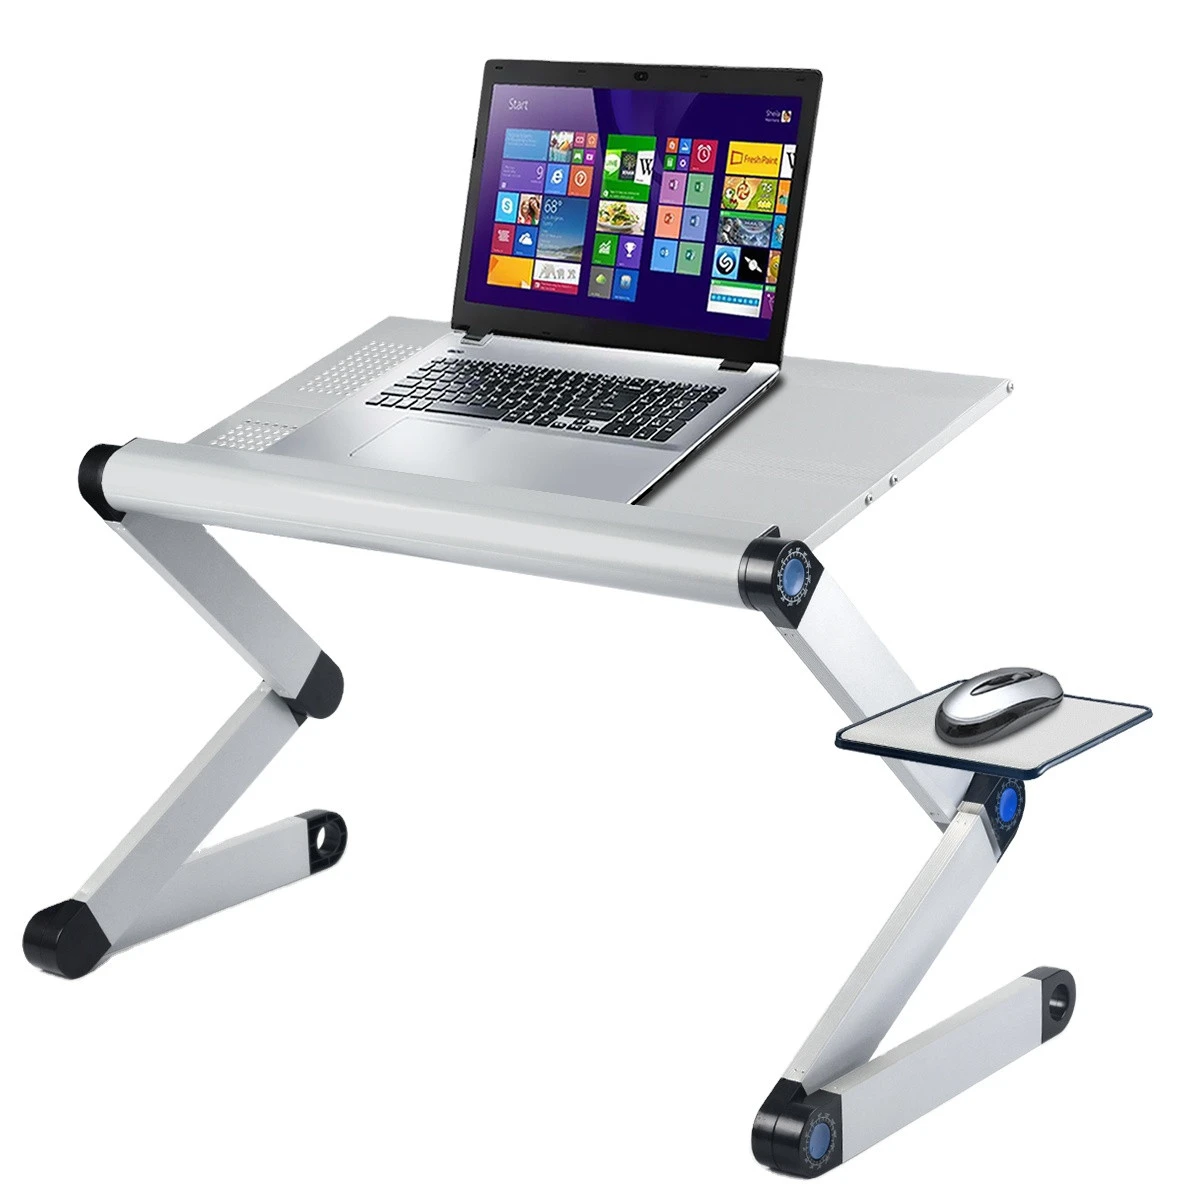 Laptop Folding Table Stand Aluminum Desk With Large Cooling Fan and mouse pad adjustable